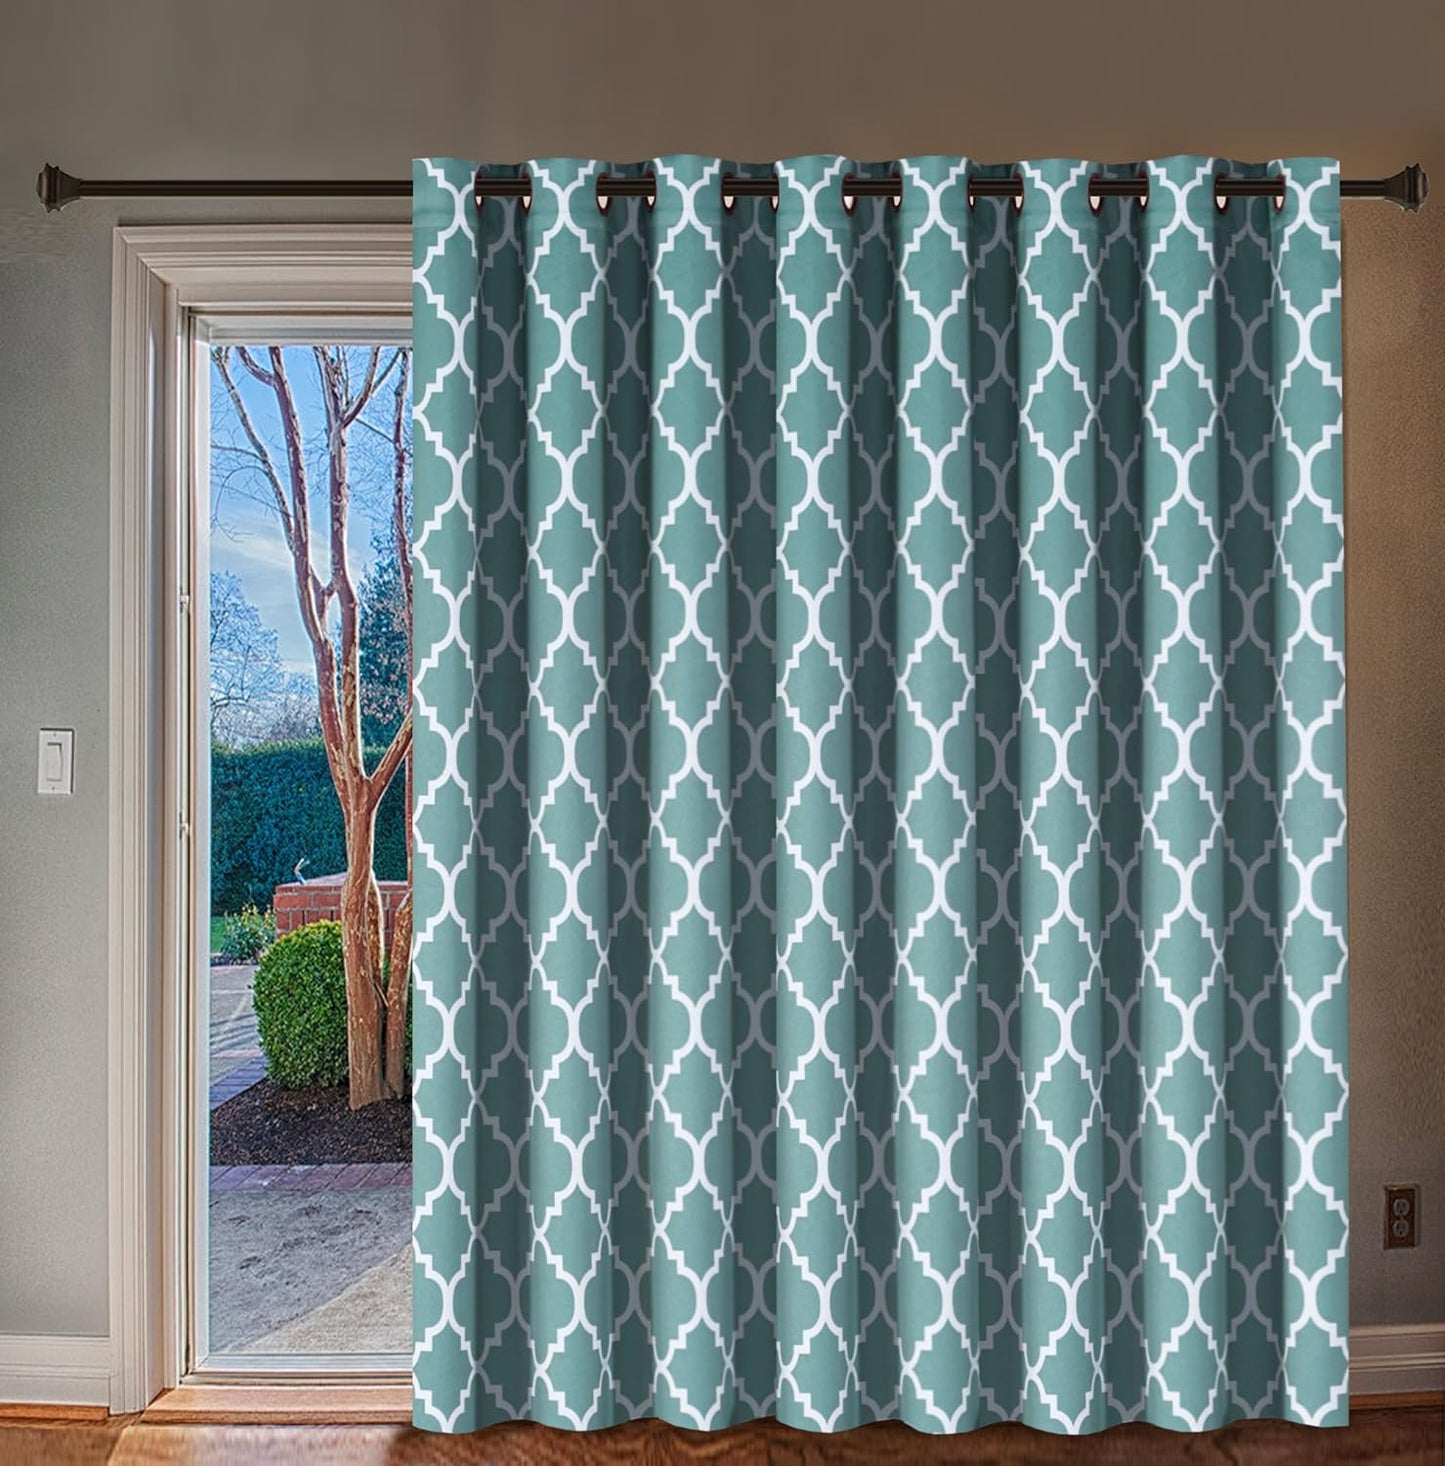 H.VERSAILTEX Extra Wide Blackout Curtain 100X84 Inches Thermal Insulated Curtain for Sliding Glass Door -Grommet Top Patio Door Curtain - Moroccan Tile Quatrefoil Pattern, Dove and White  H.VERSAILTEX Teal  White 100"W X 84"L 